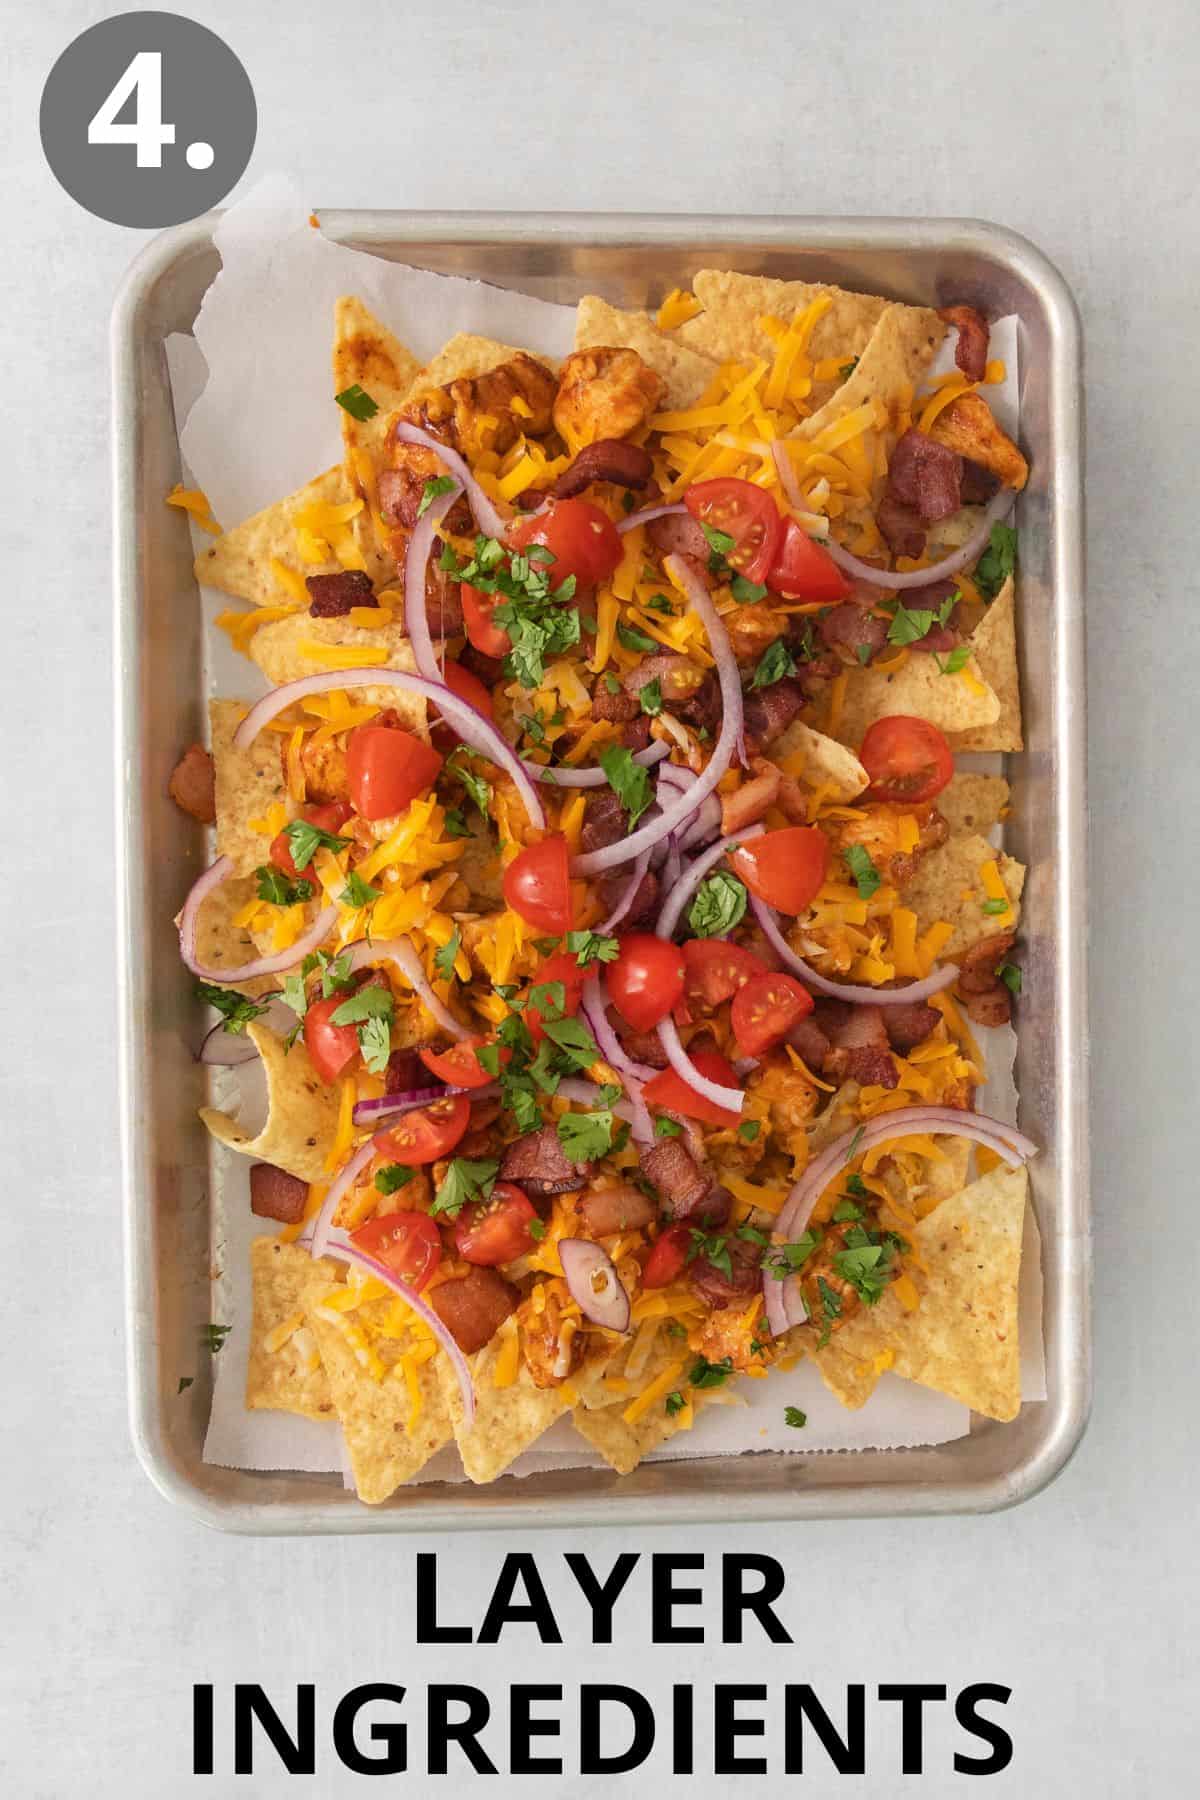 The first layer of nacho ingredients layered on a sheet pan